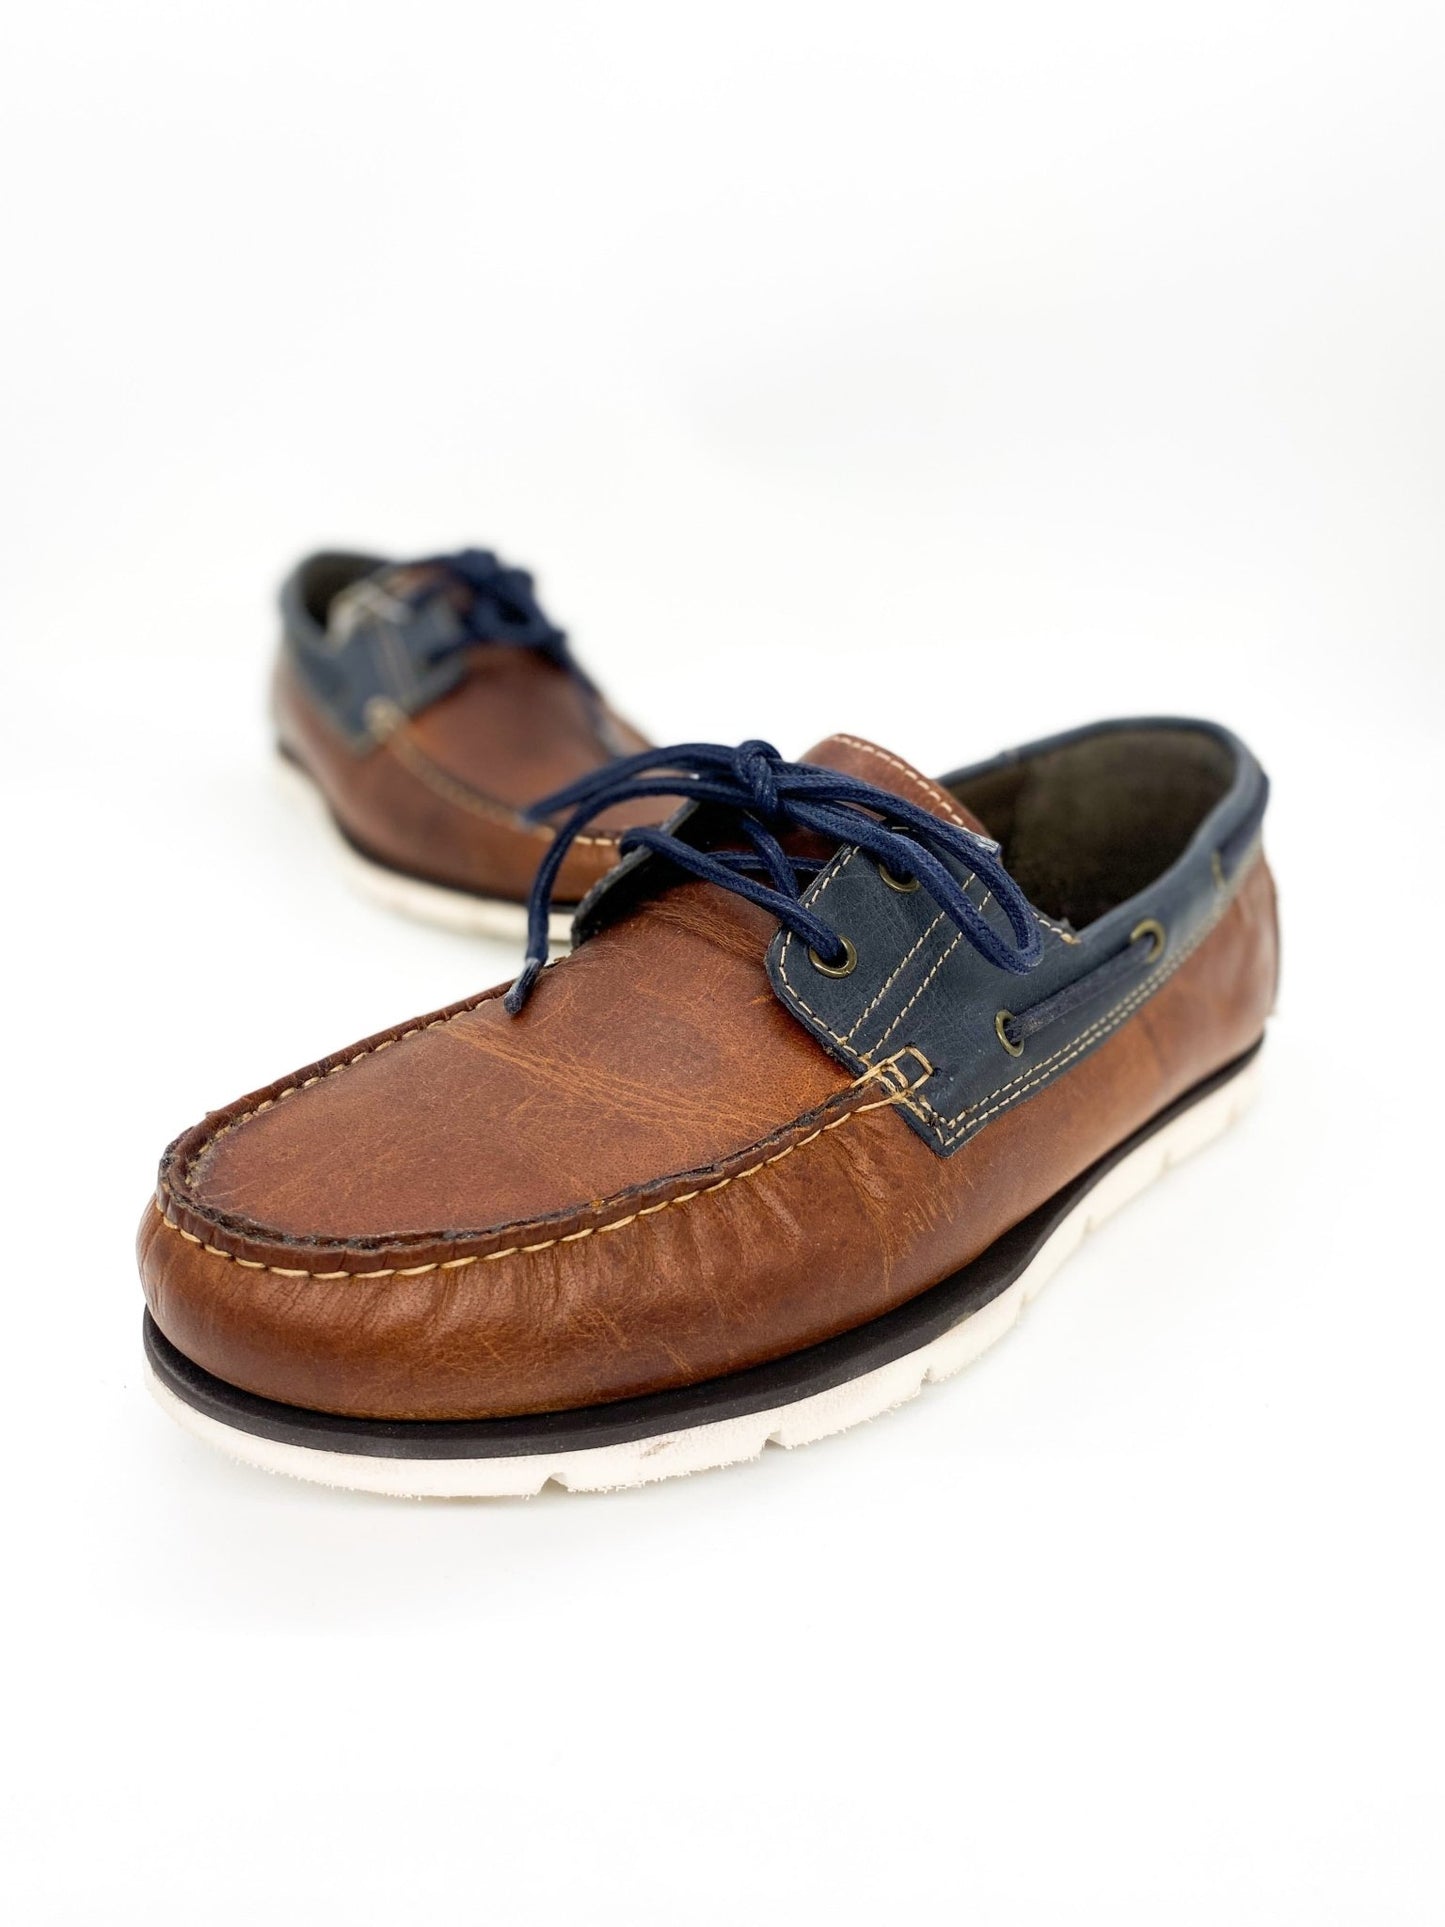 Men's Leather Boat Shoes Brown & Navy - Sal - GLS Clothing